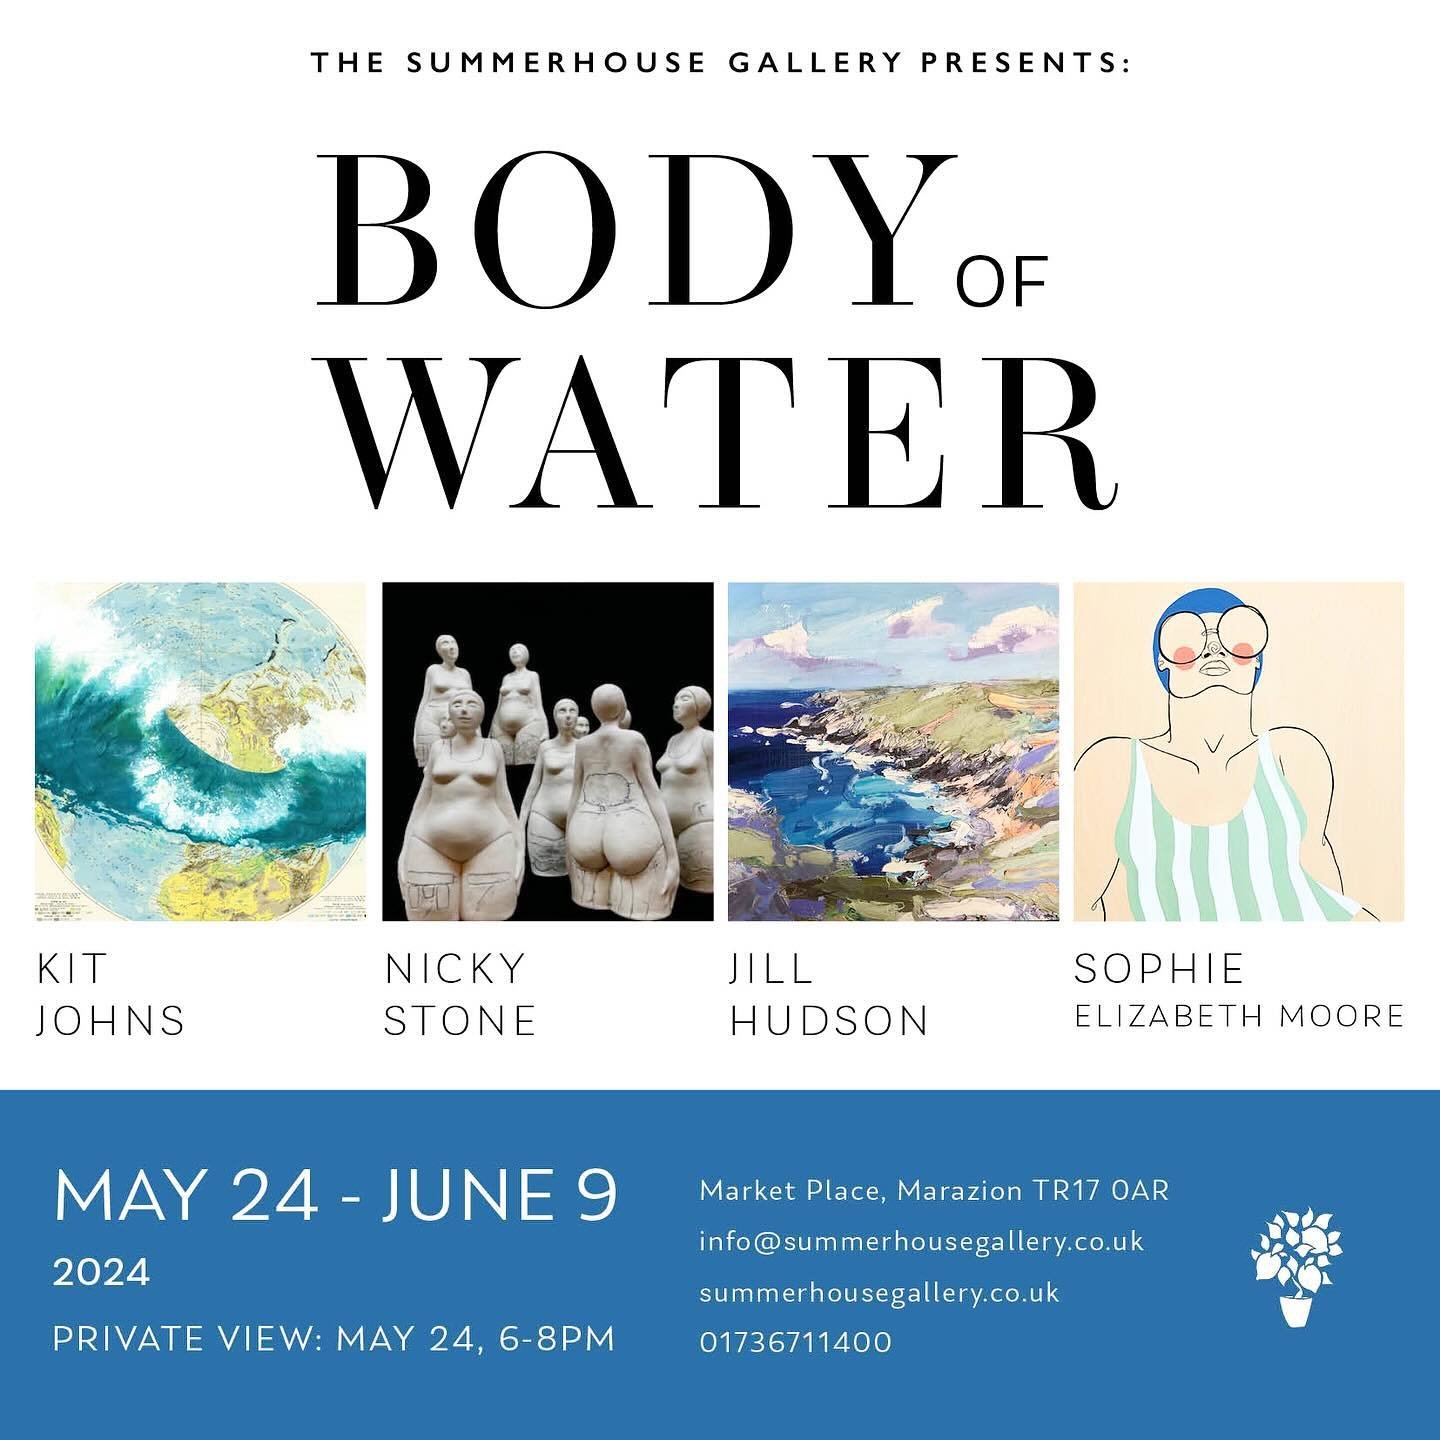 Save the date! 
May 24th- June 9th 

We are really excited to announce the date of our next mixed artist show: Body of Water 

Body of Water features a brand new, fantastically dynamic body of work from one of our long term gallery artists, Kit Johns